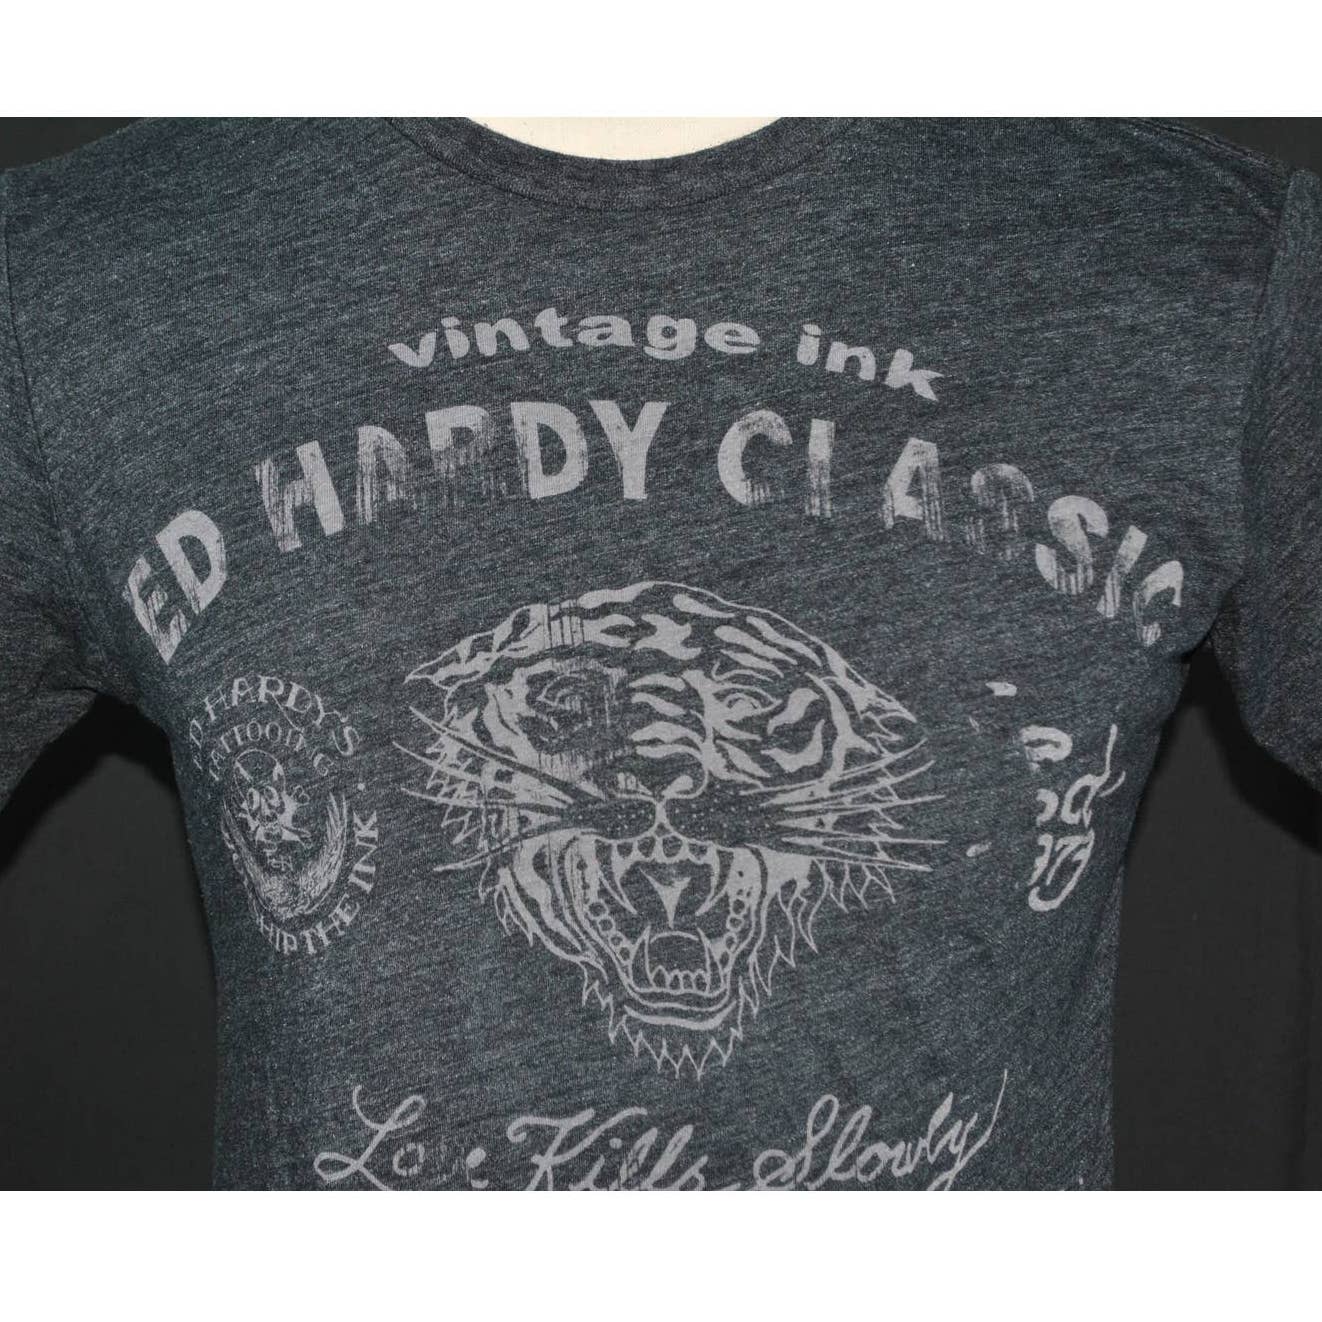 Vintage Ed Hardy "Vintage Ink" Gray Graphic T Shirt- M